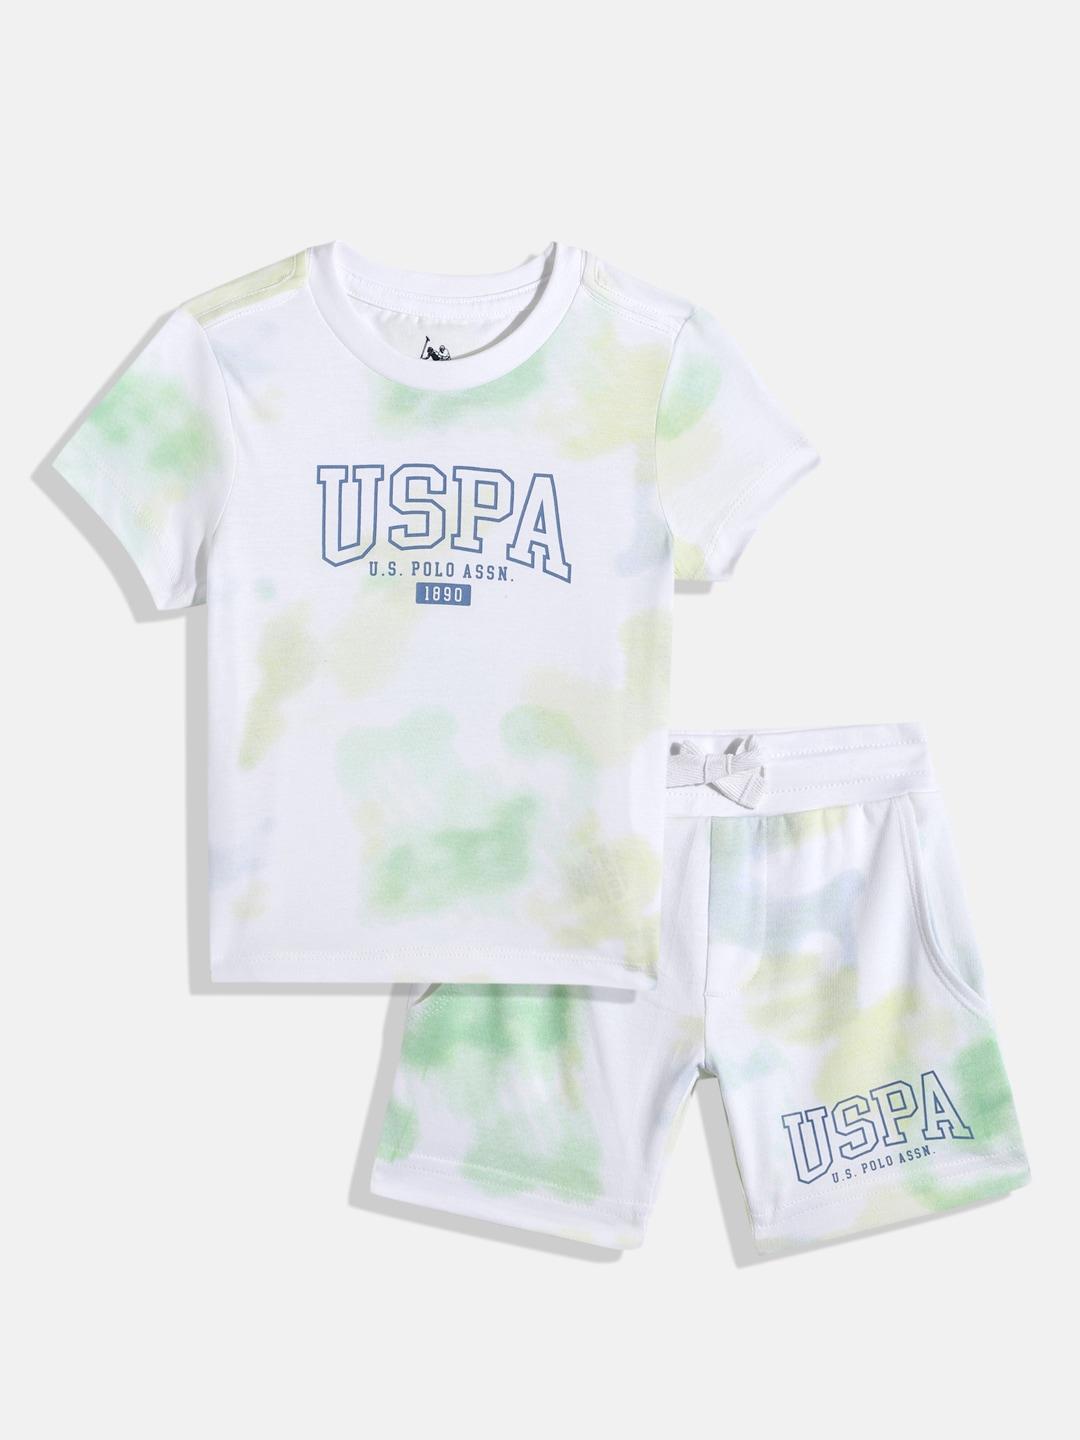 u.s. polo assn. kids boys dyed & brand logo print knitted pure cotton t-shirt with shorts